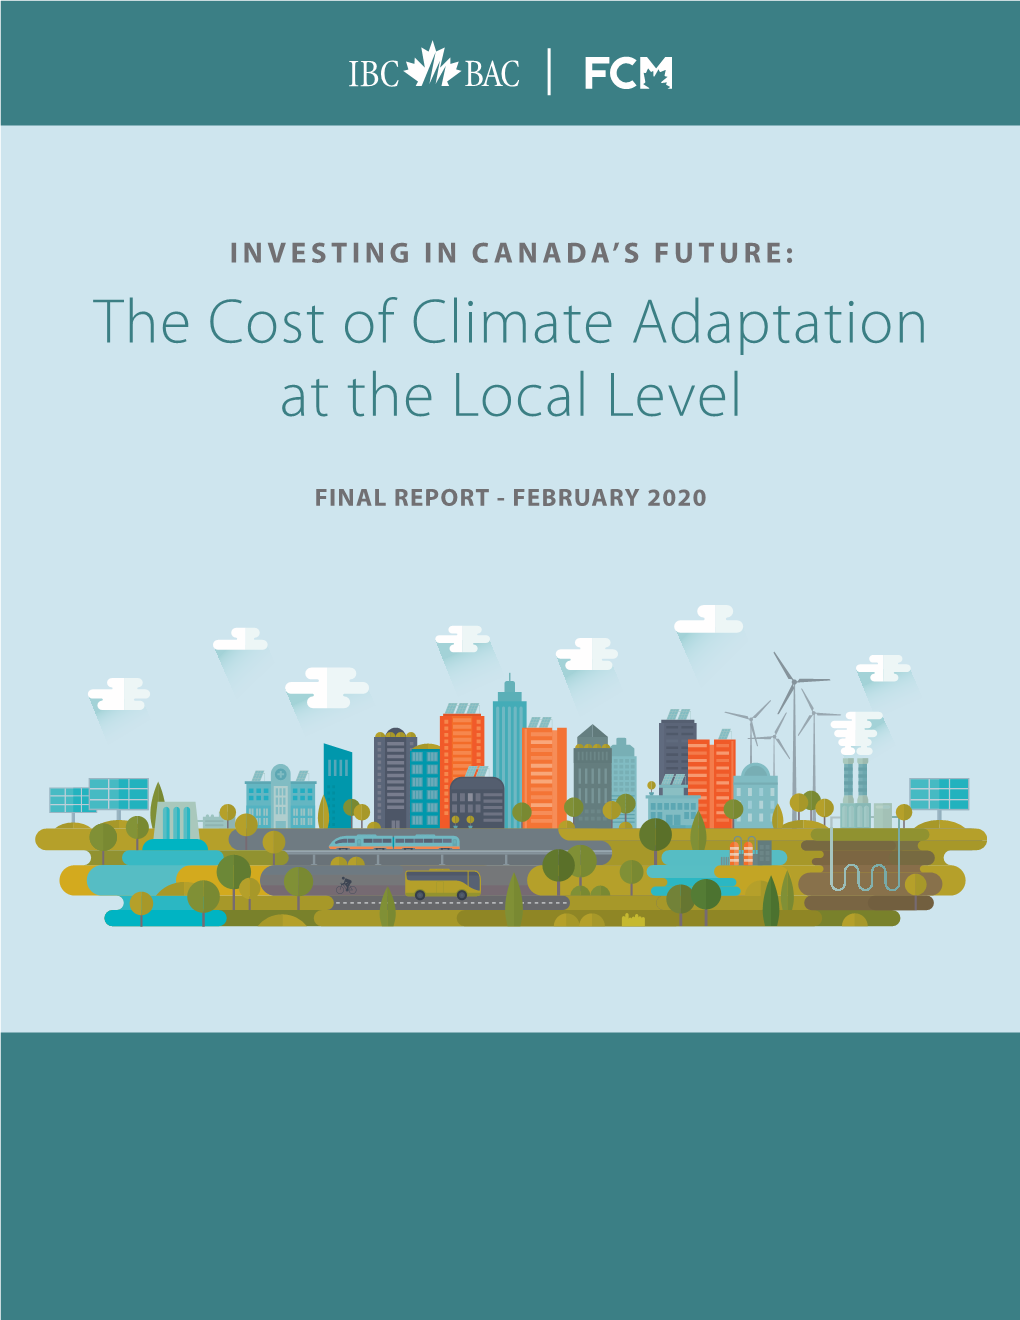 The Cost of Climate Adaptation at the Local Level